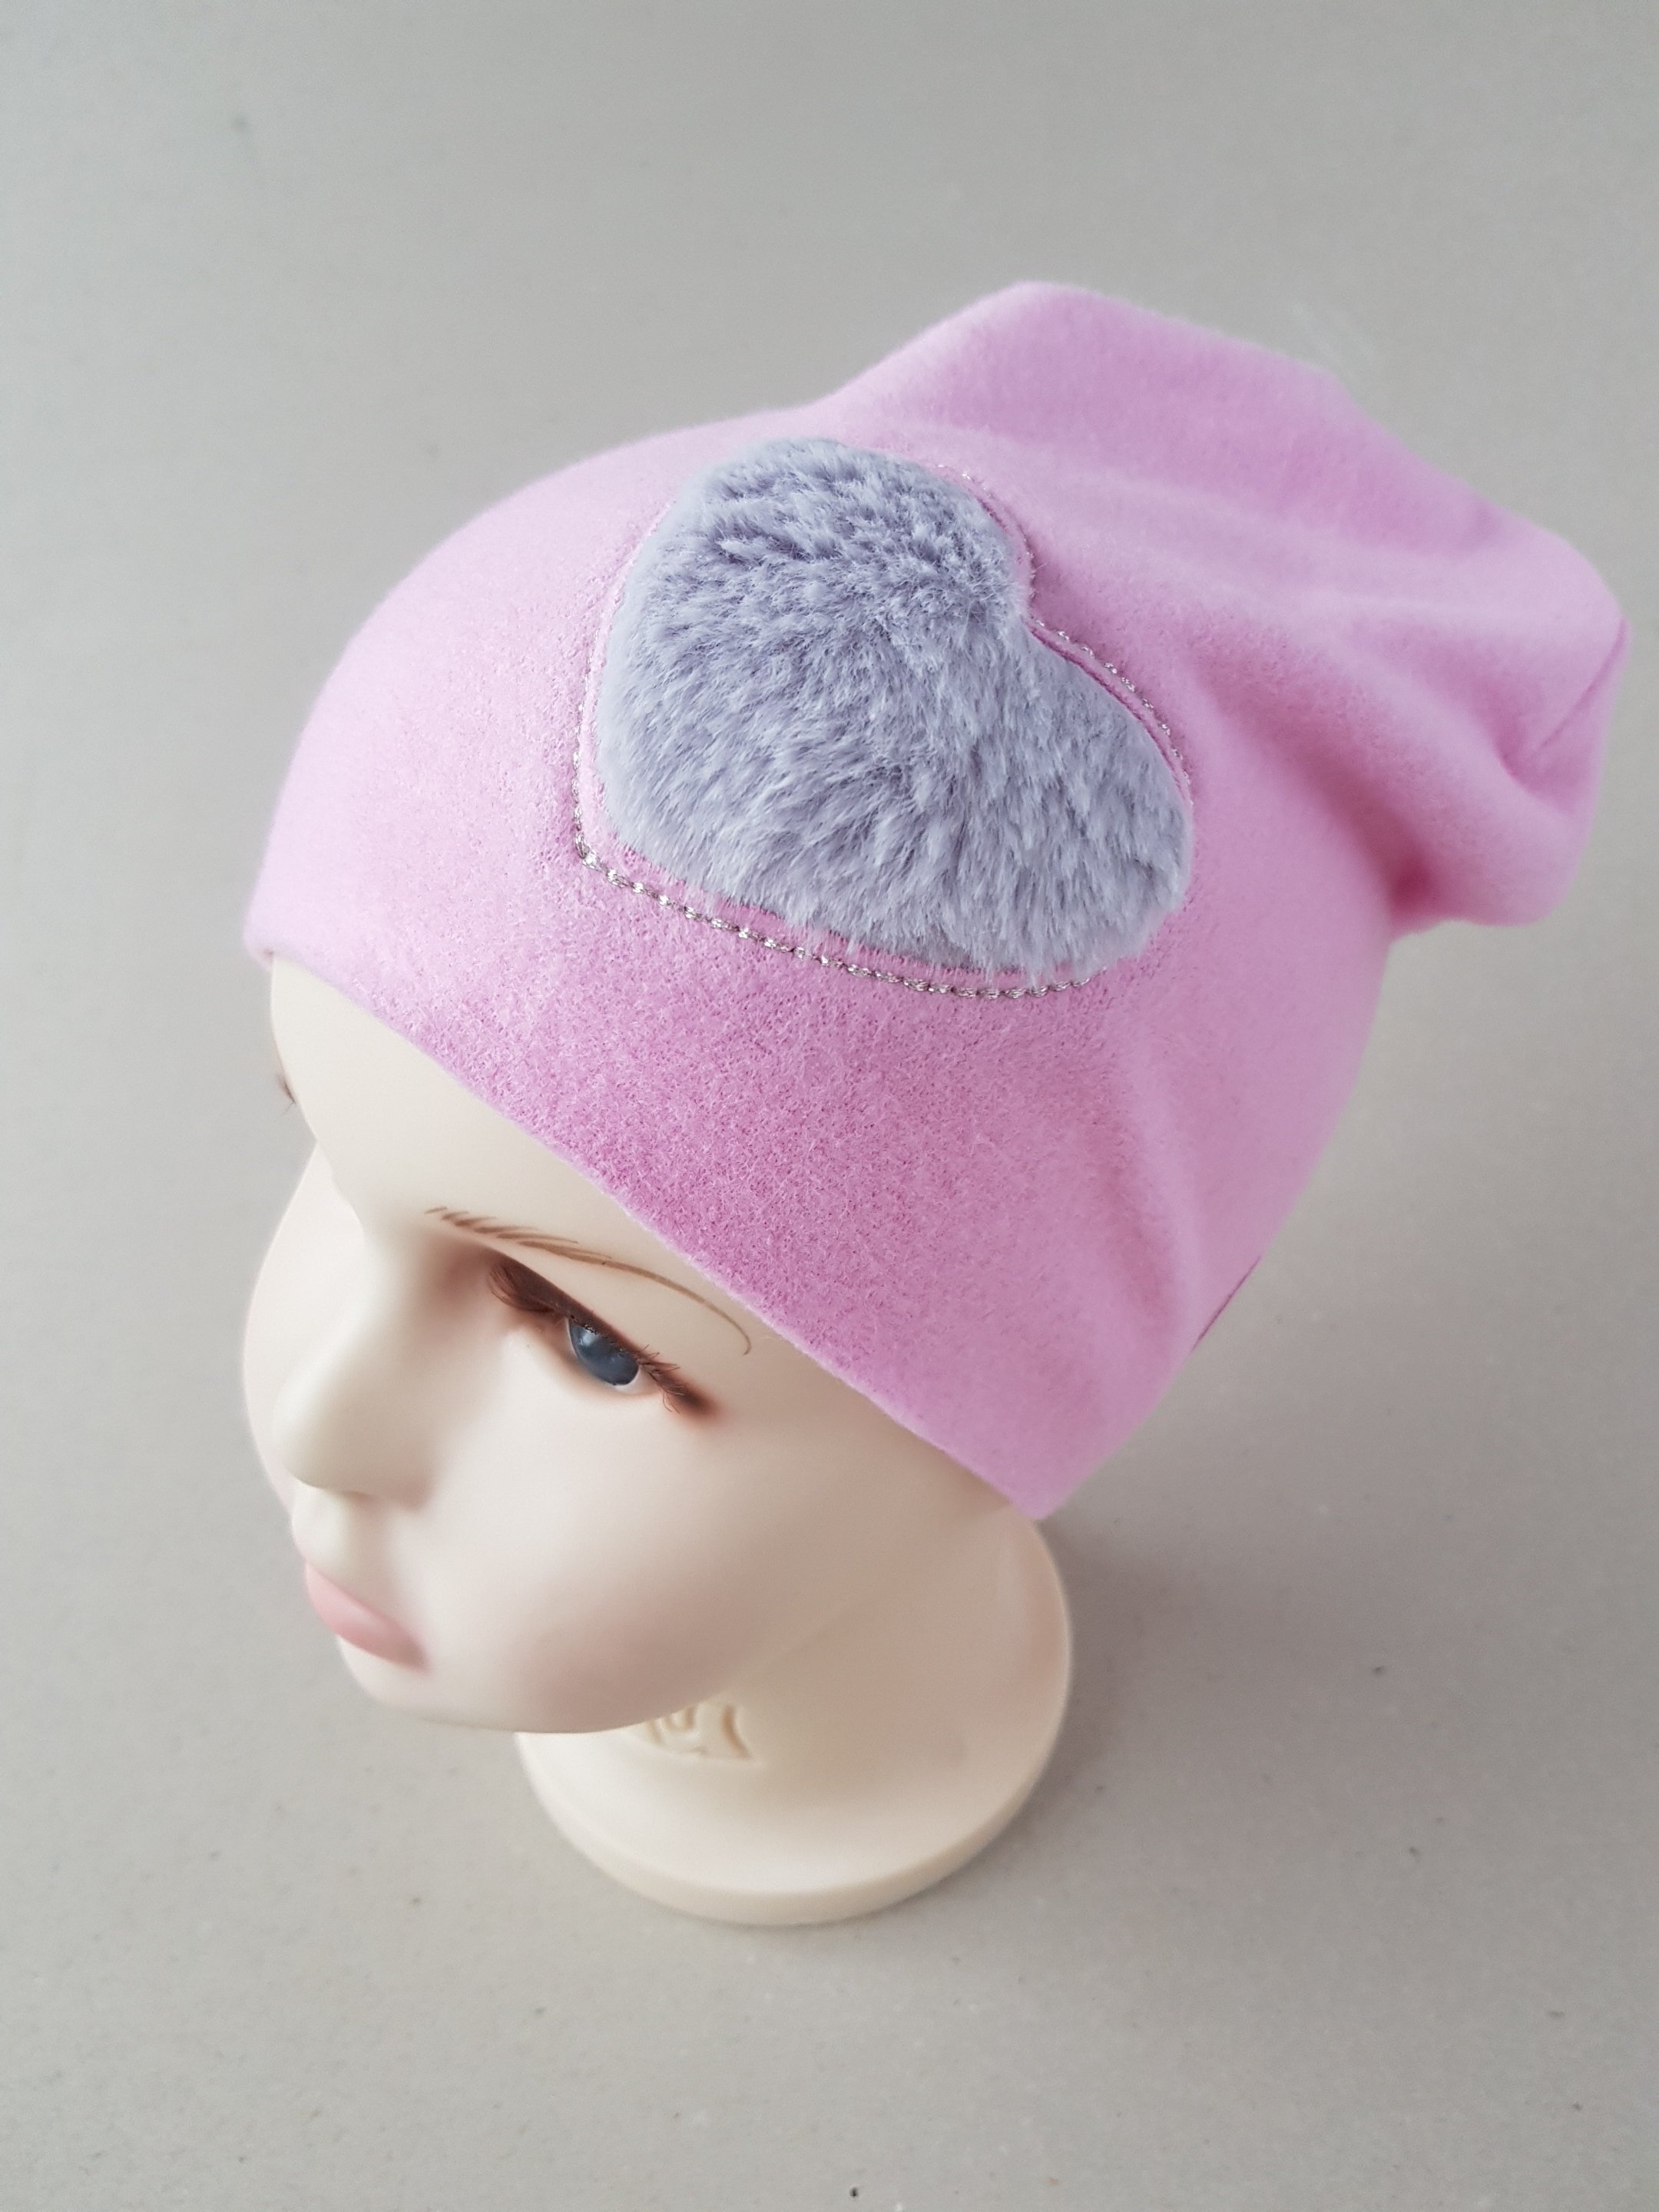 Beanie Hat For Girls Fur Heart ( From 4 Months Up To 2 Years Old & More) 9-12 Months – Pink Soft – Bebe-Mar – evCushy